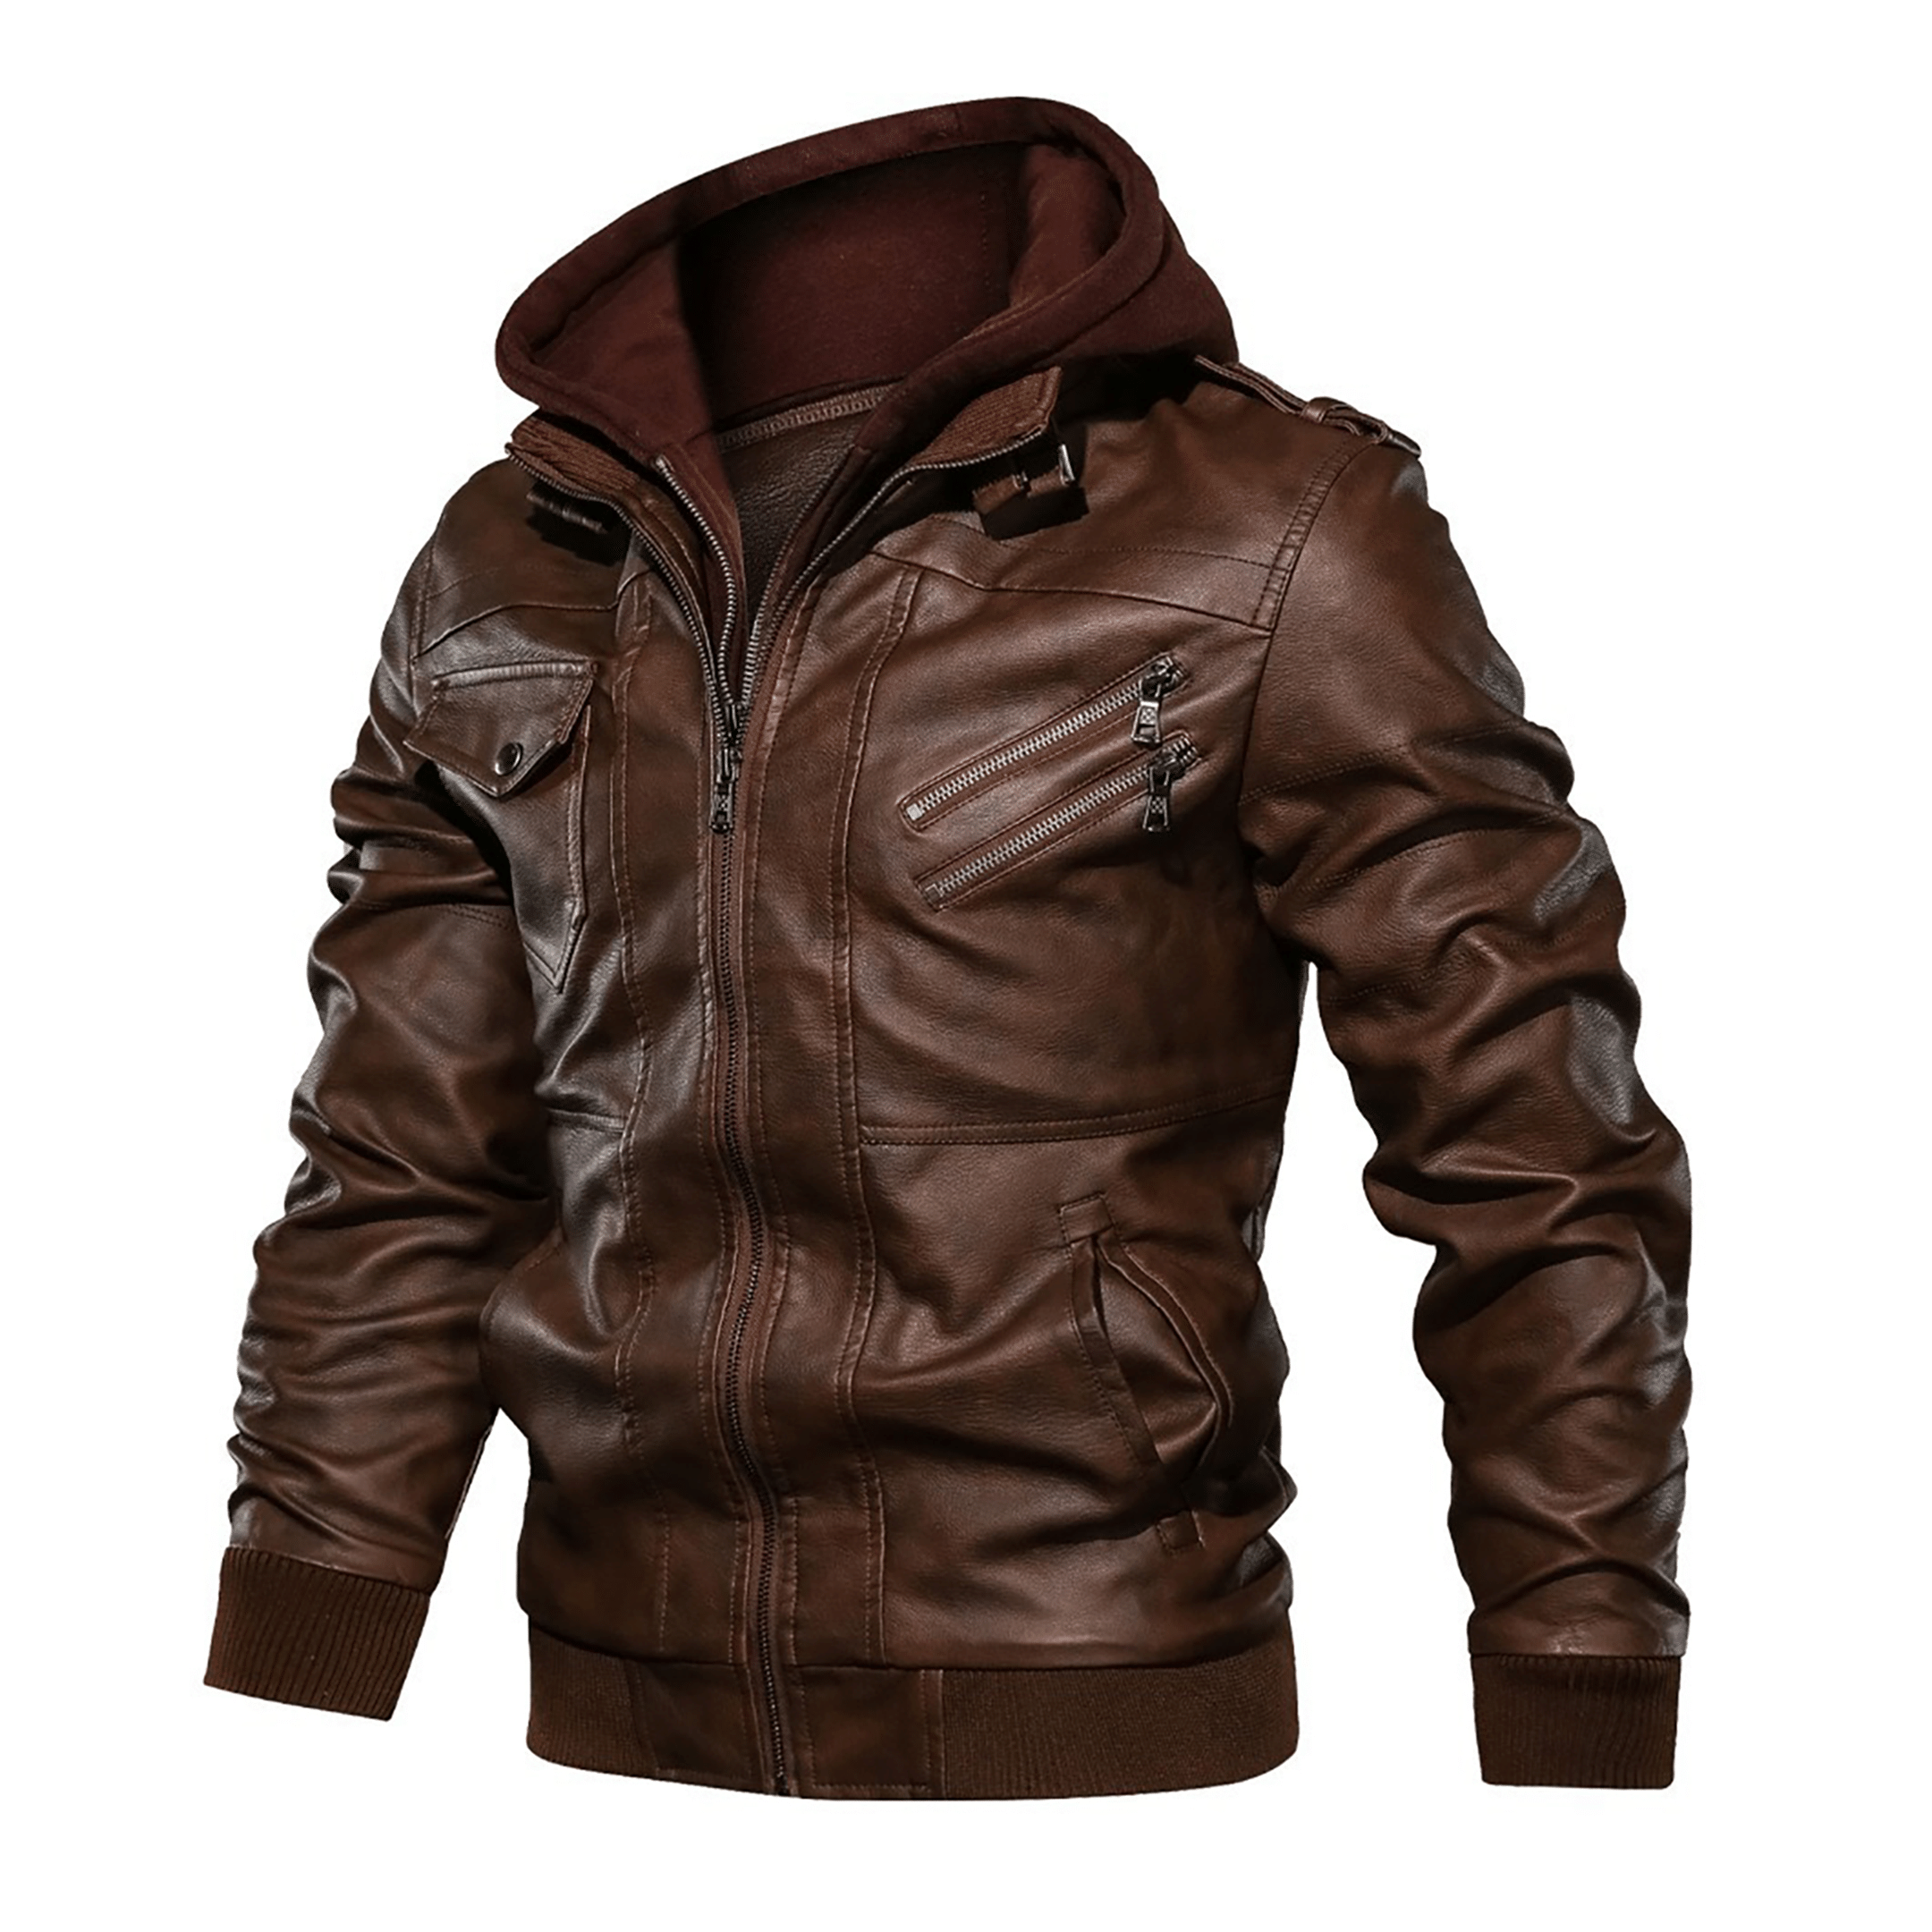 Top leather jackets and latest products 387